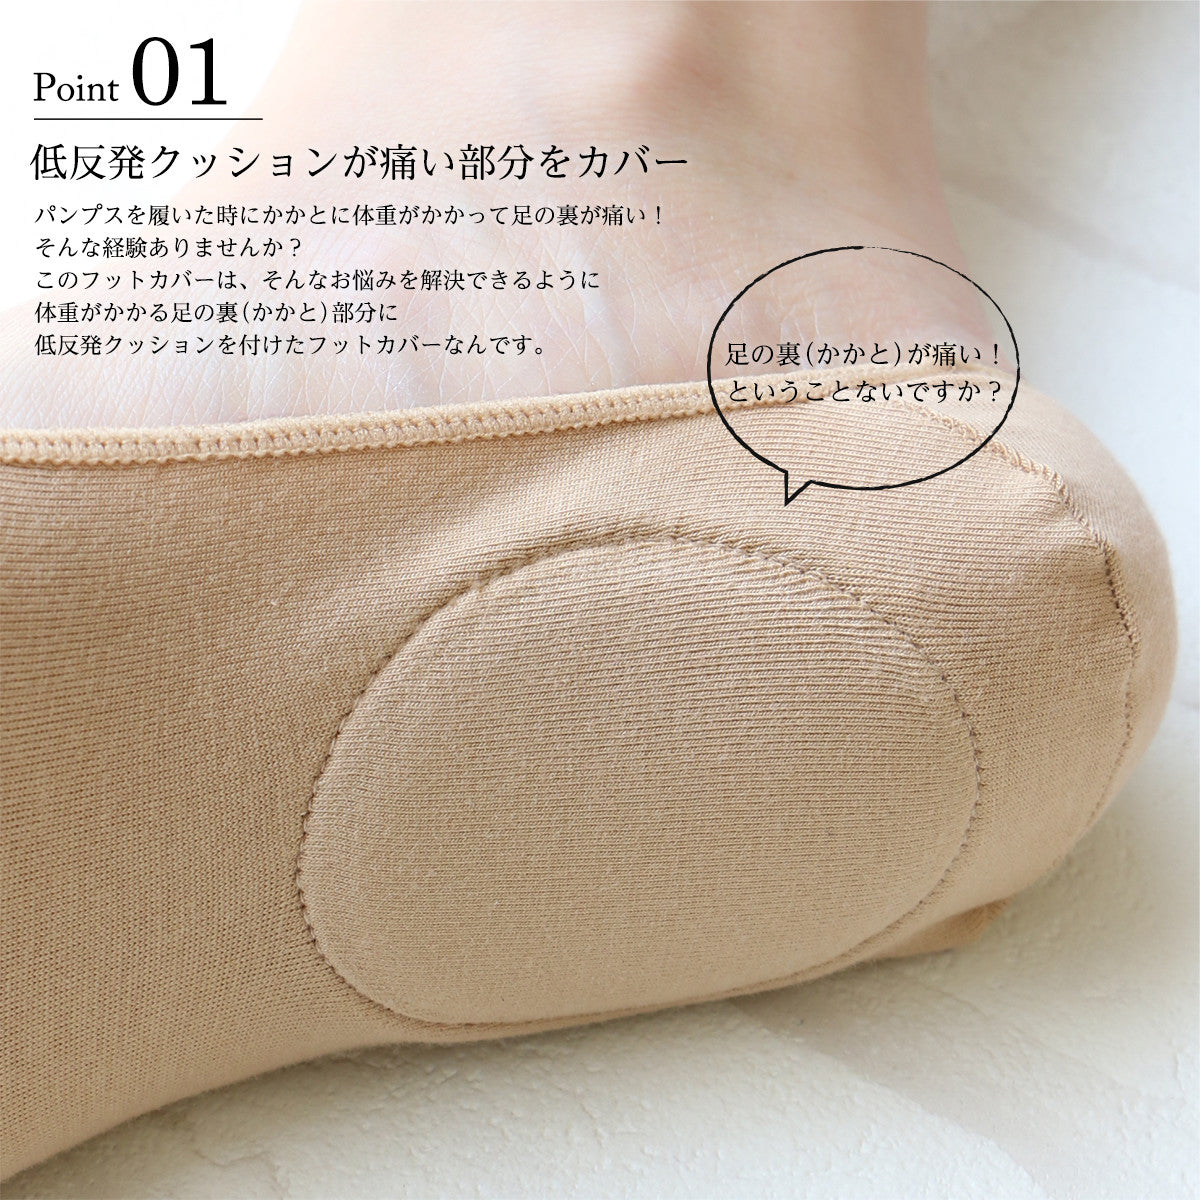 Cushioned Heel Support Pad No Show Socks  | Beige or Black - CHERRYSTONEstyle